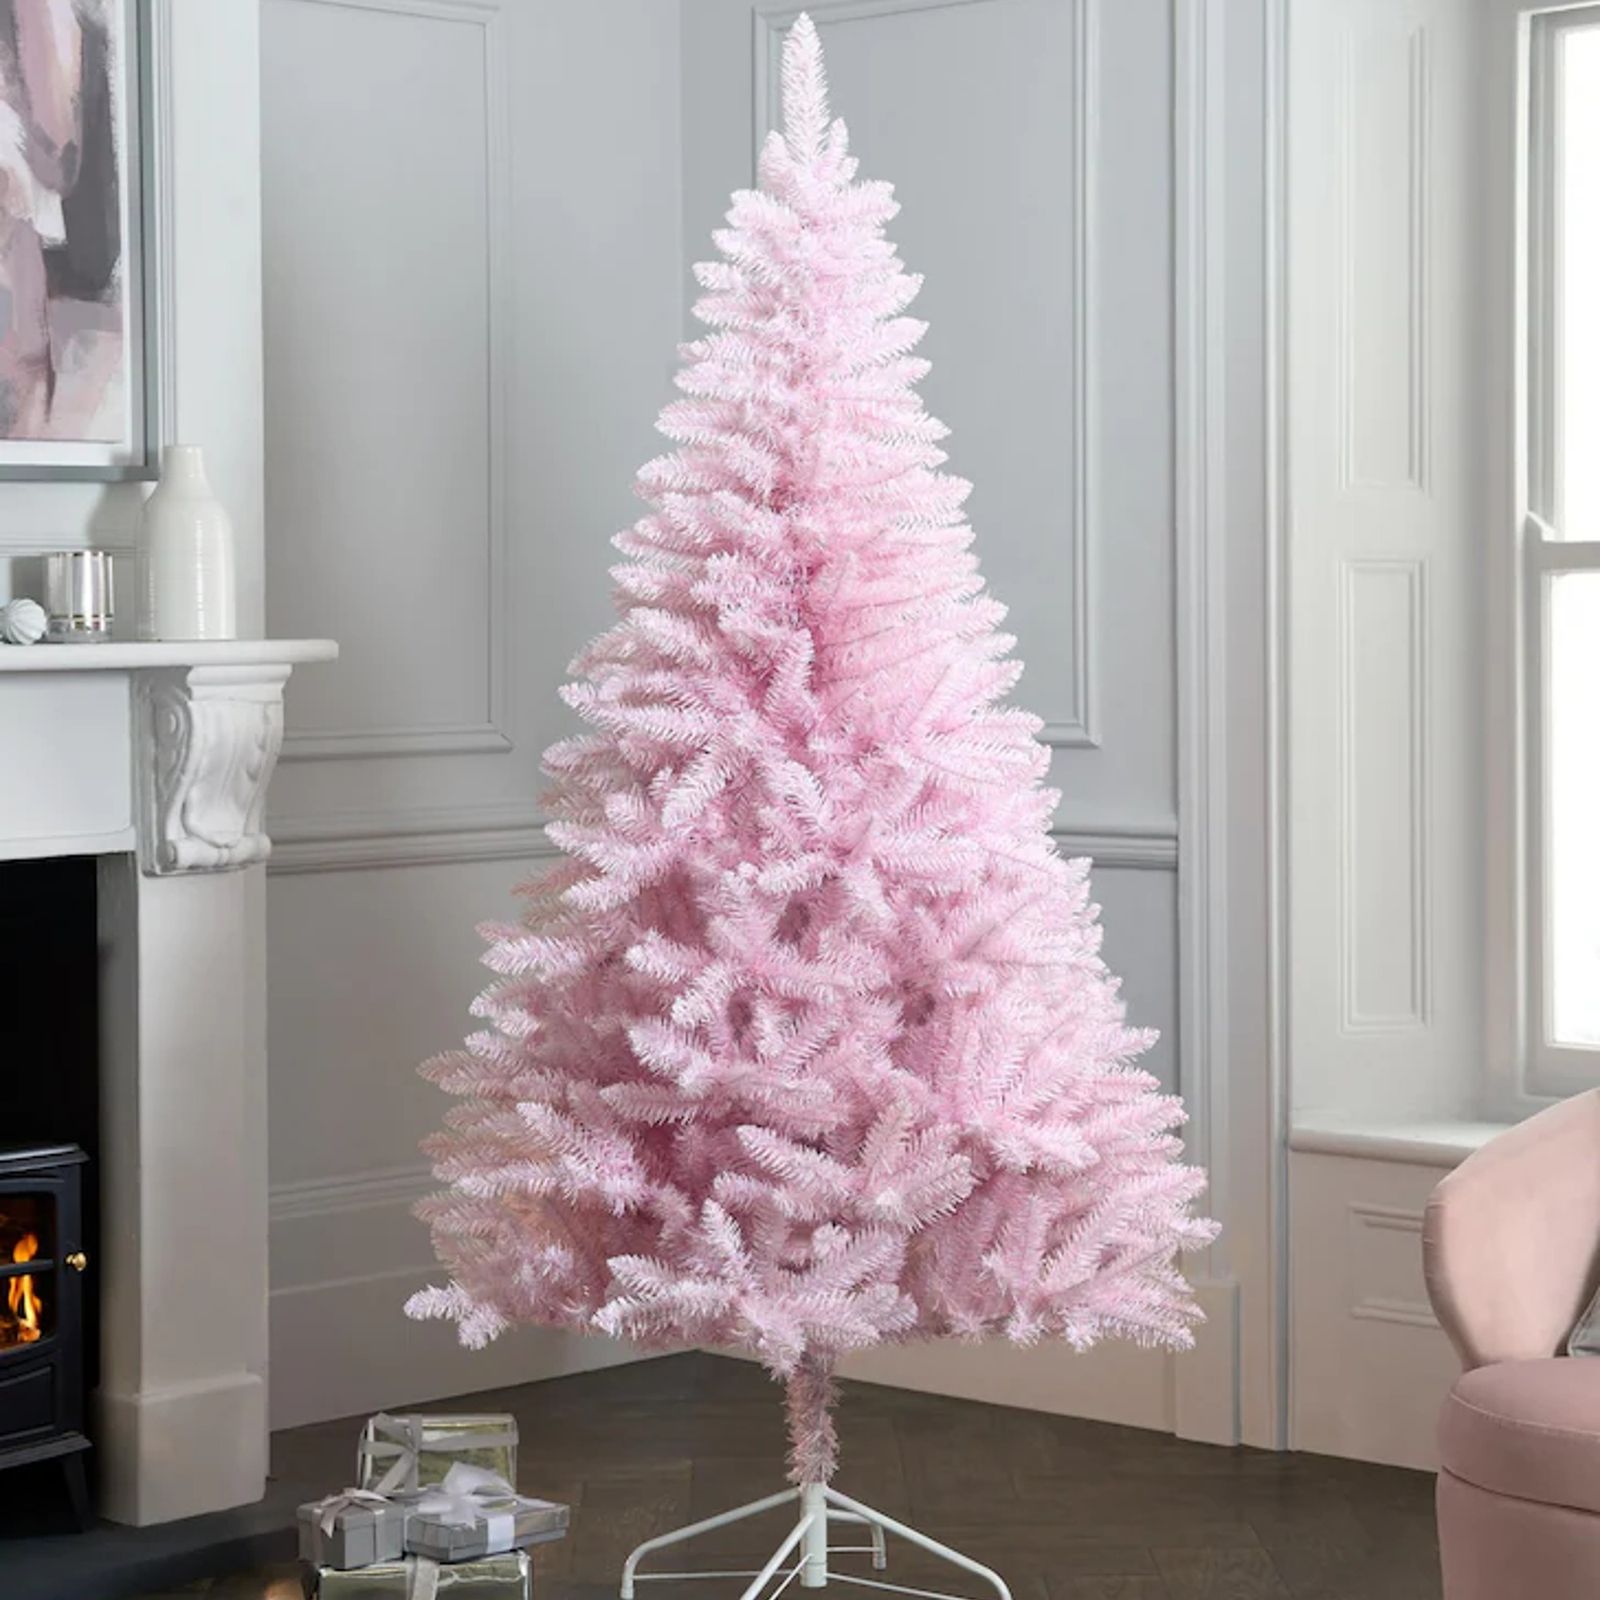 Pink Christmas trees are trending on TikTok | Ideal Home